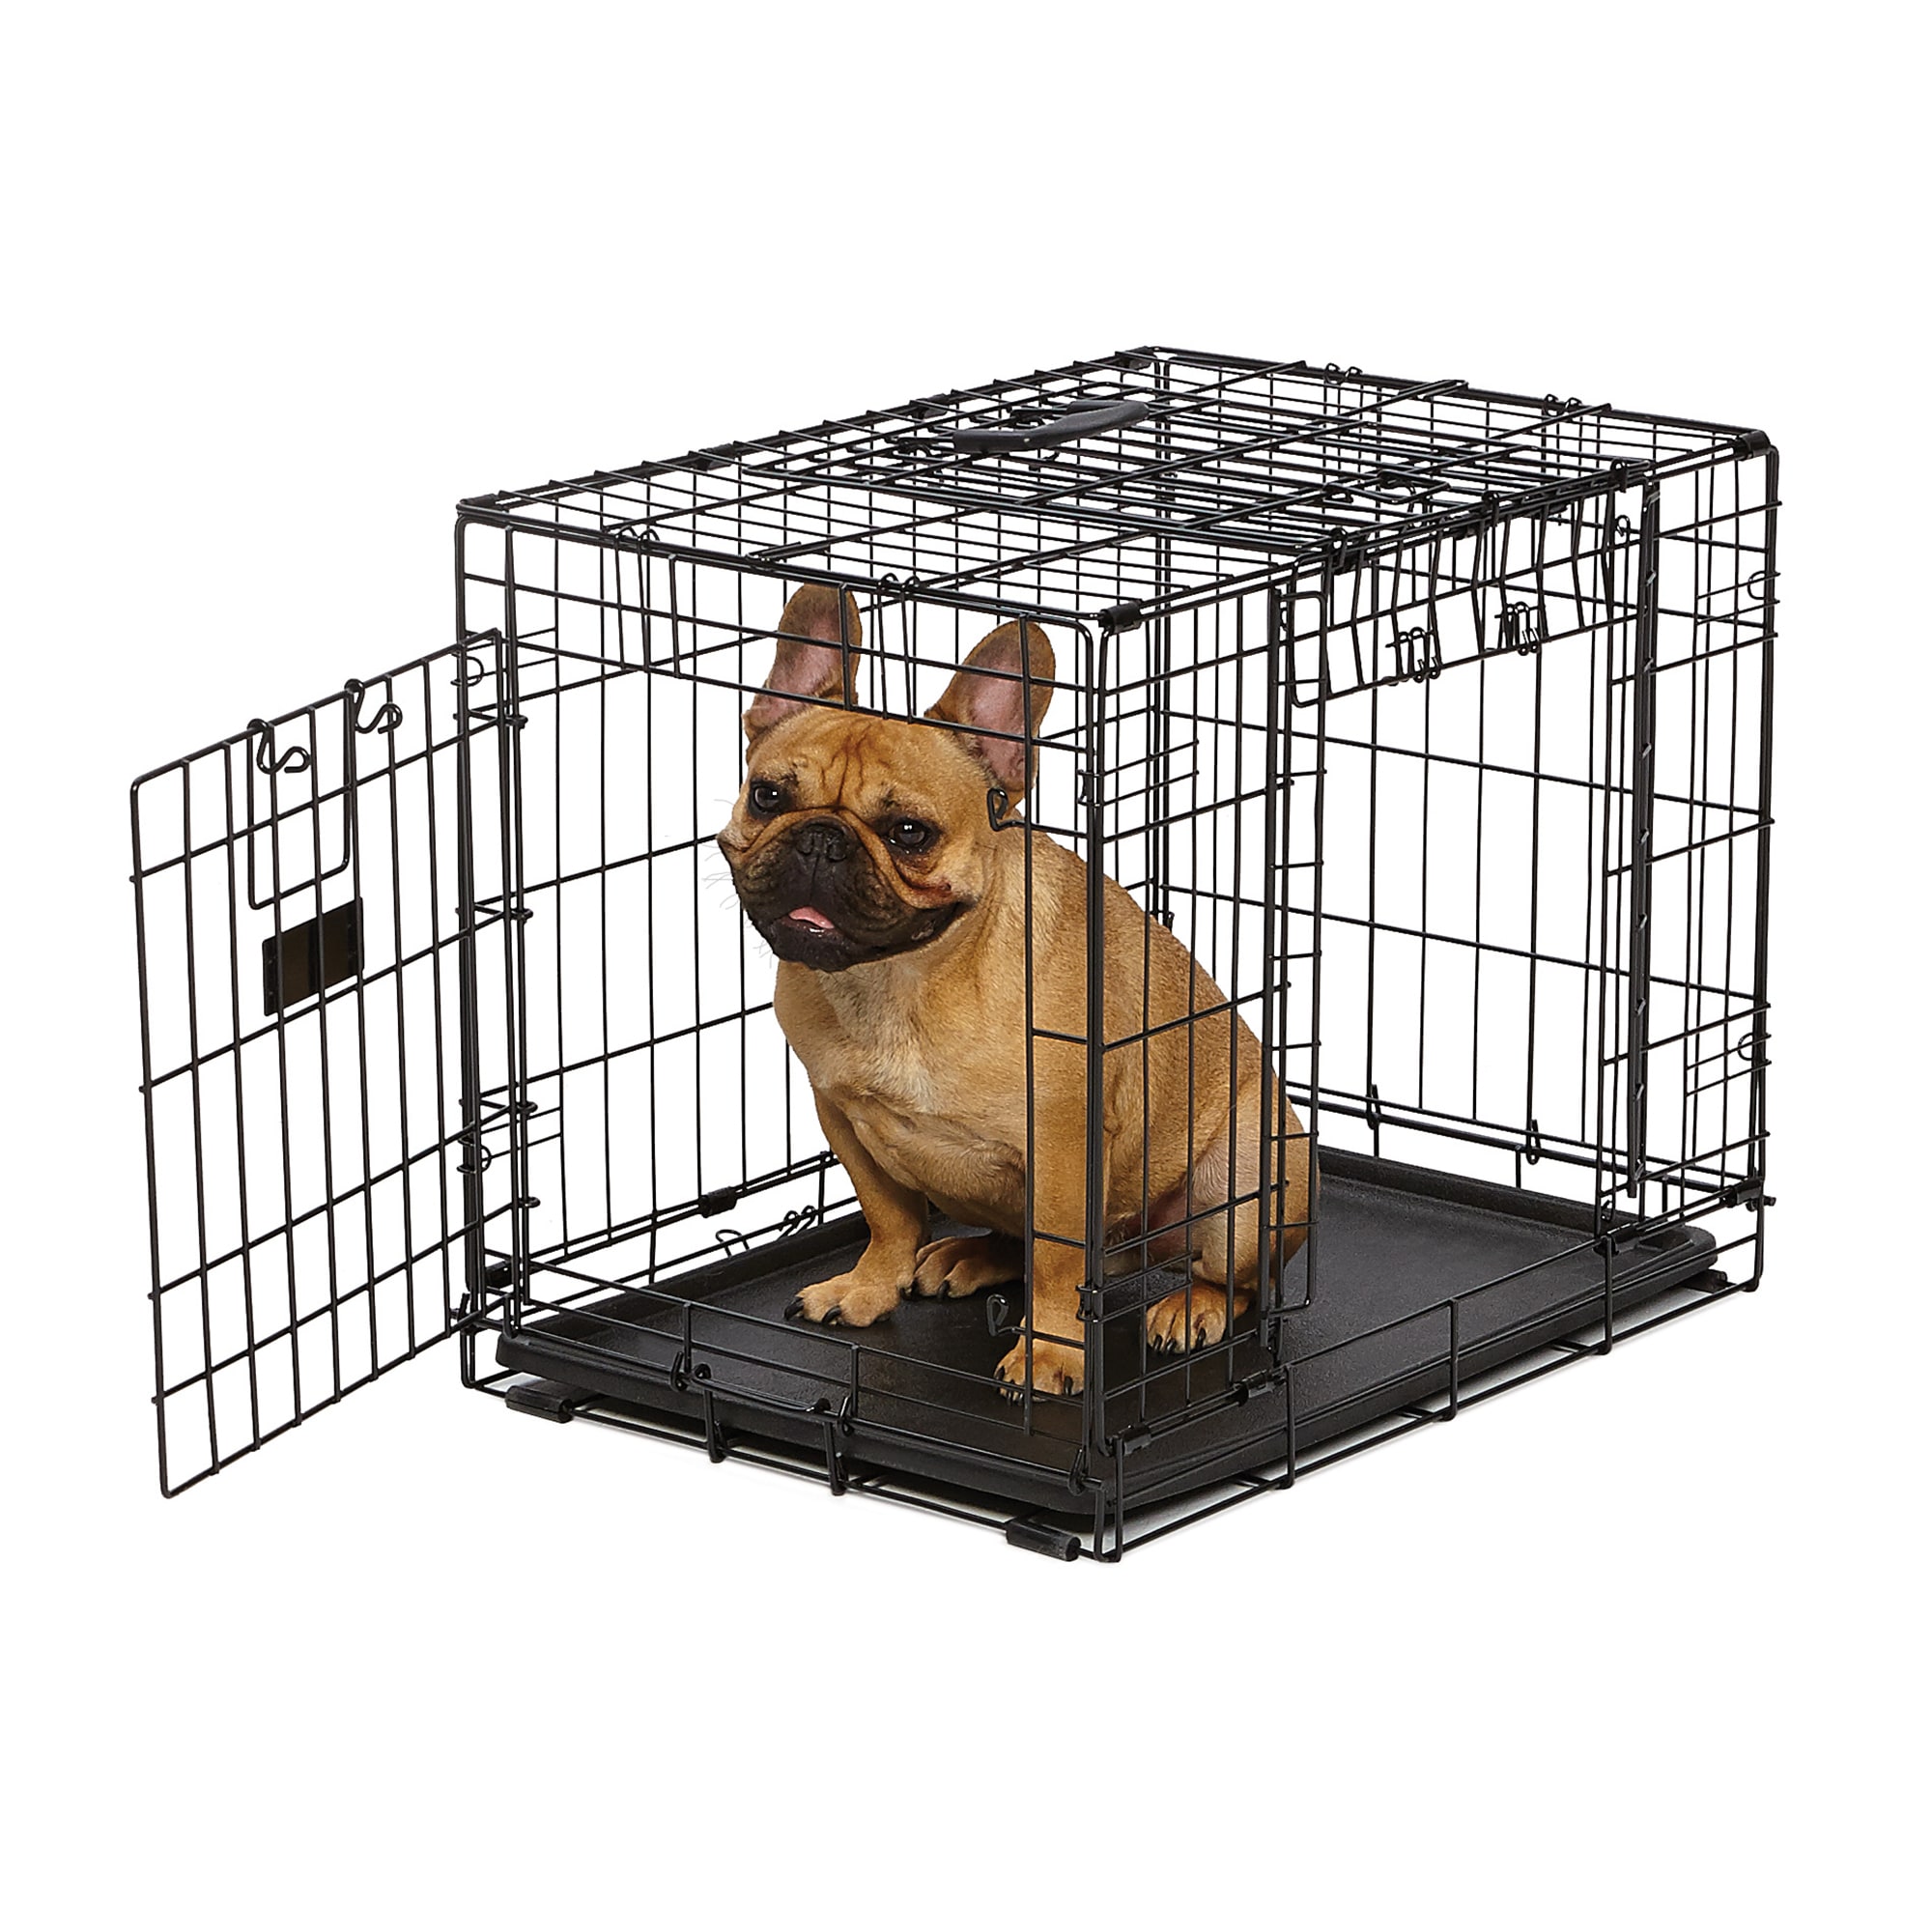 Midwest Ovation Trainer Double Door Dog Crate, 25" L X 18" W X 20" H Petco